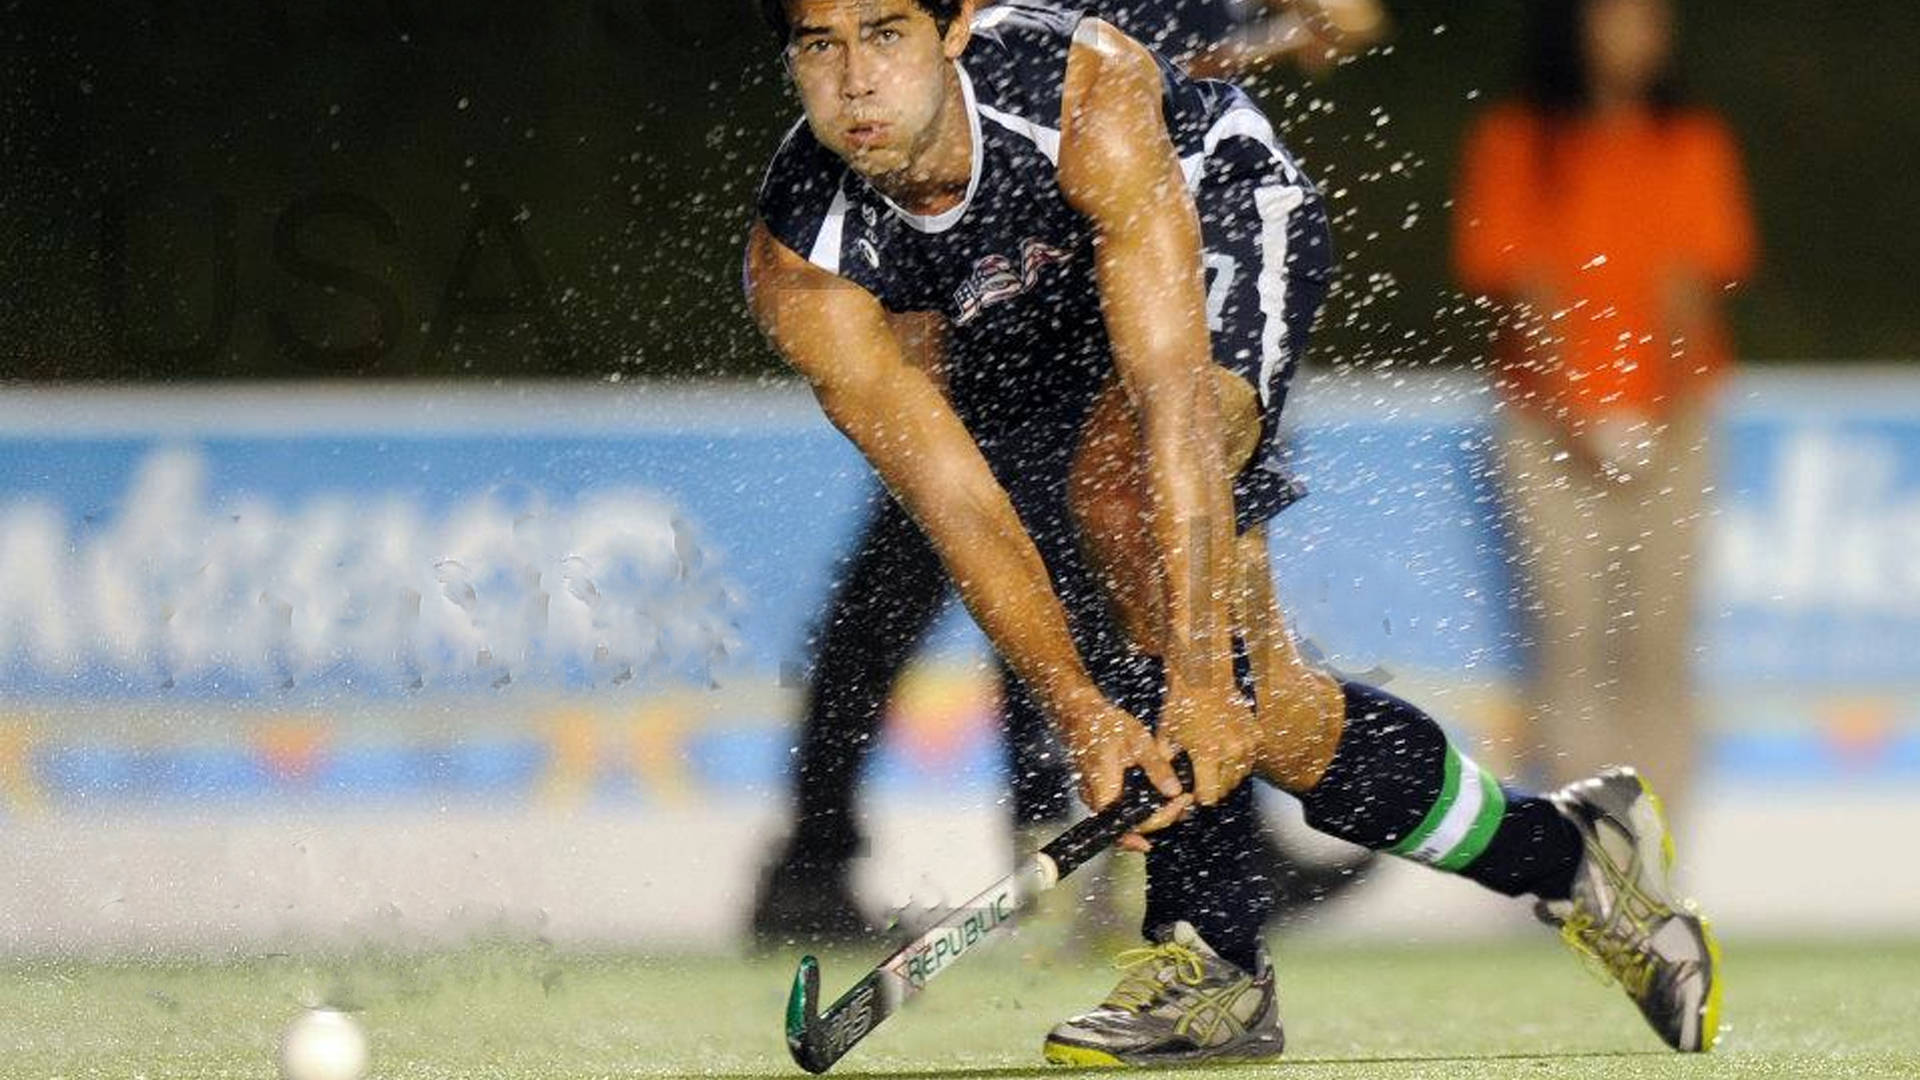 Captivating Moment In Field Hockey Background